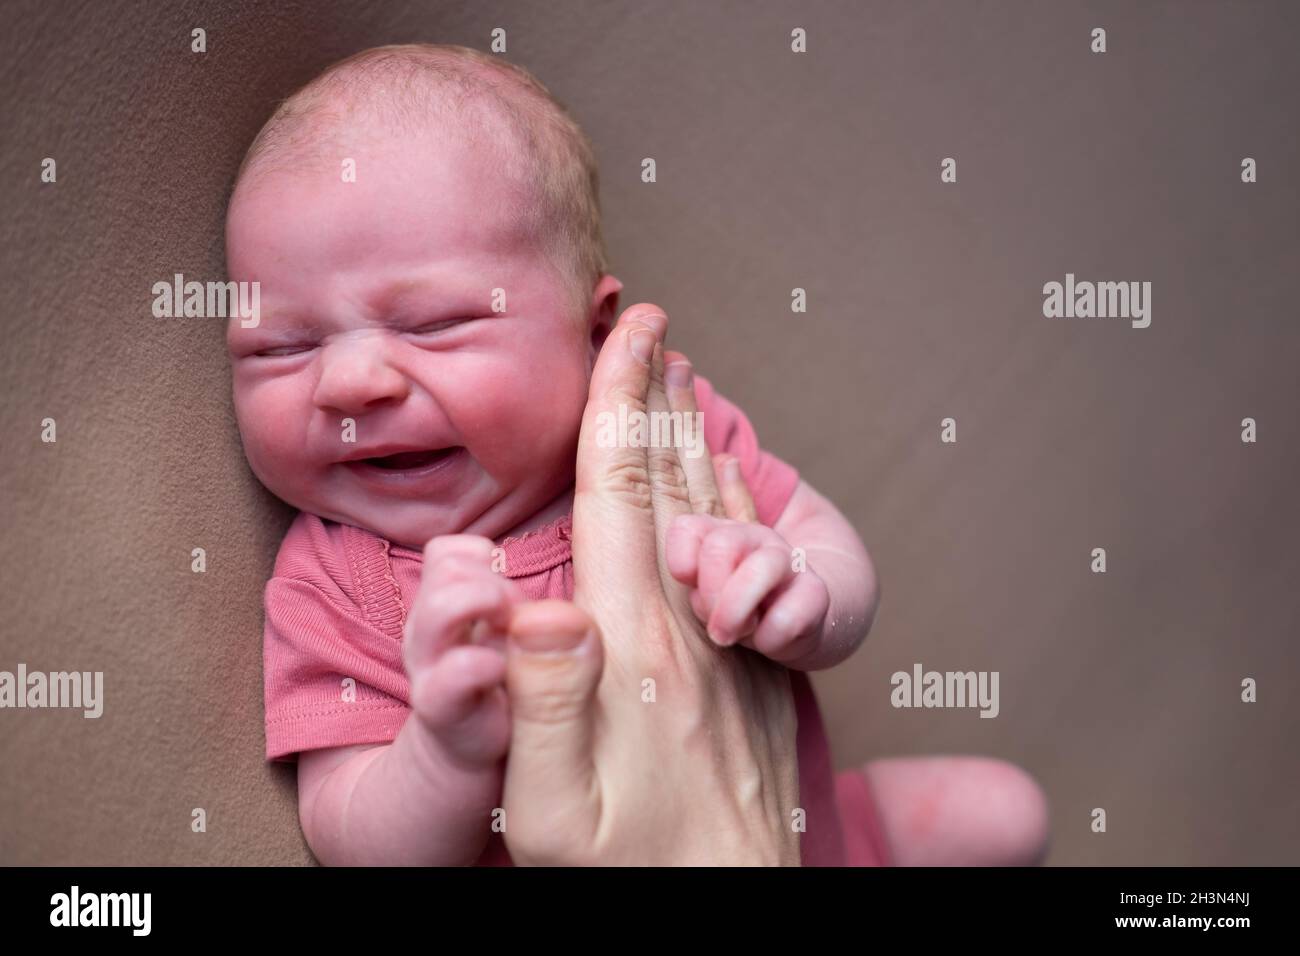 Baby boy crying while posing for his first portrait Stock Photo